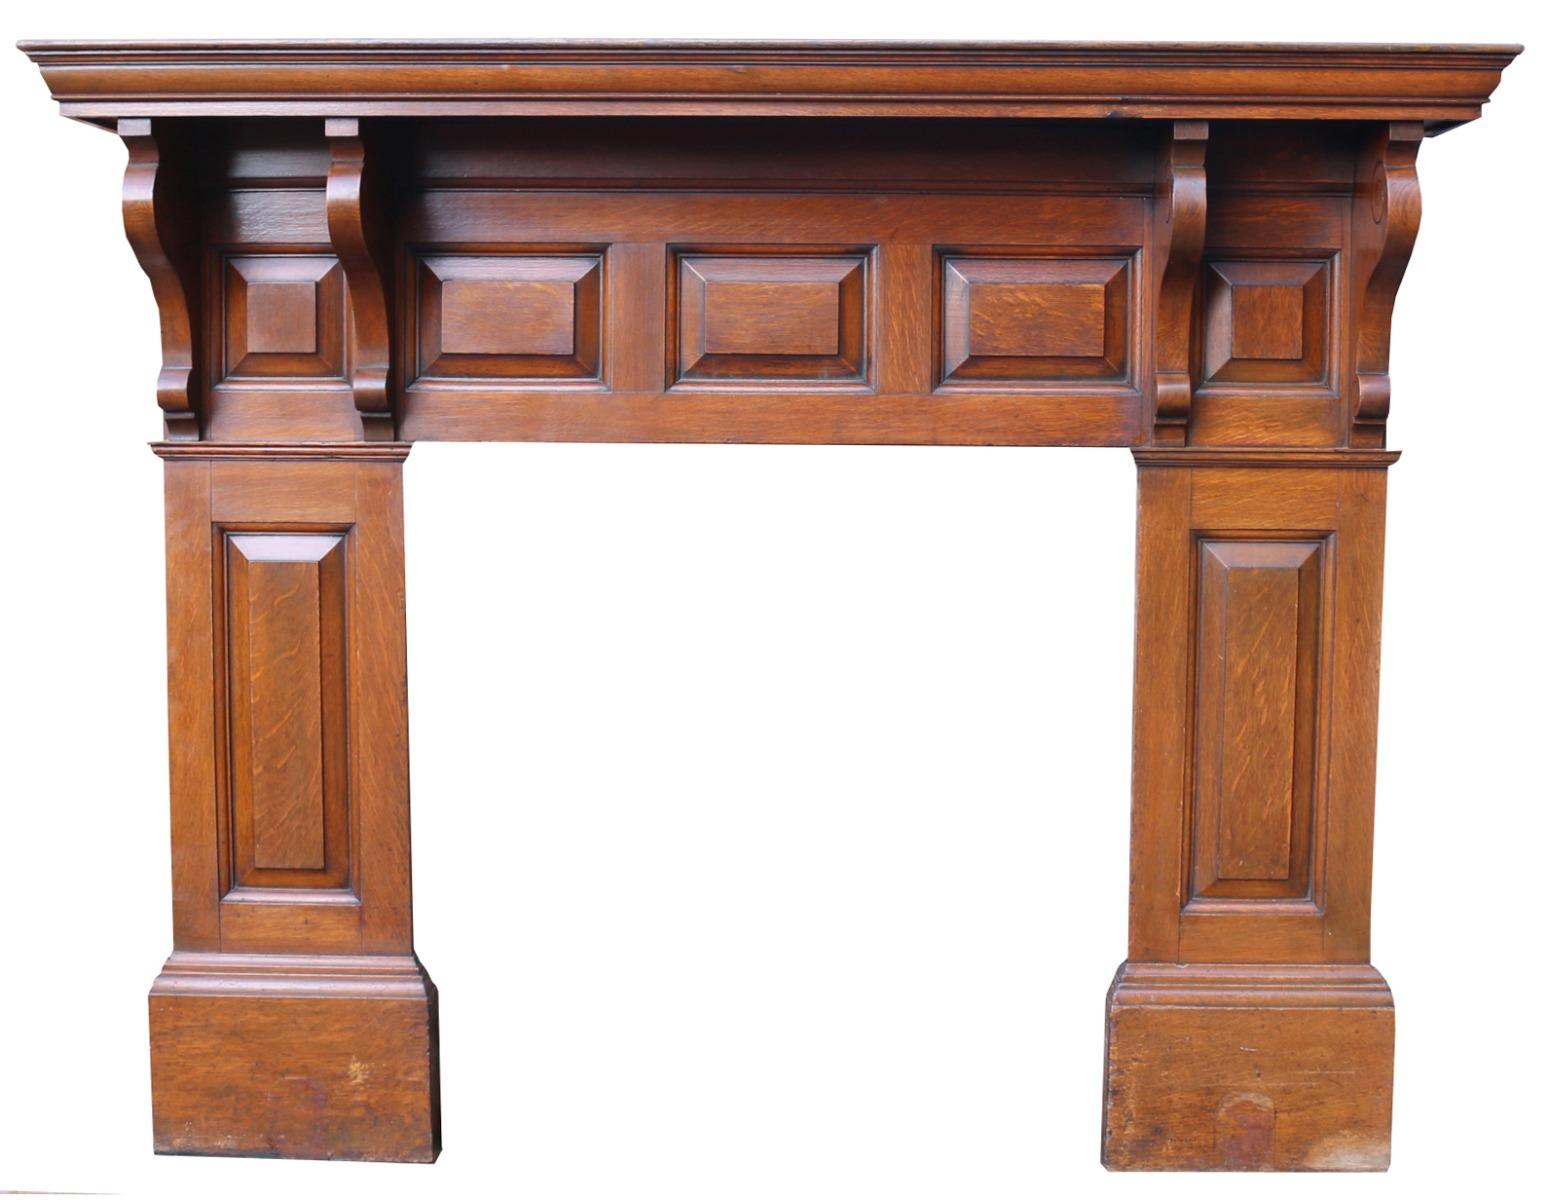 A large Victorian period oak fireplace with raised and fielded panelled frieze and jambs. The shelf supported on four oak corbels.

Additional dimensions:

Opening height 96 cm

Opening width 96.5 cm

Width between outside of legs 167 cm.